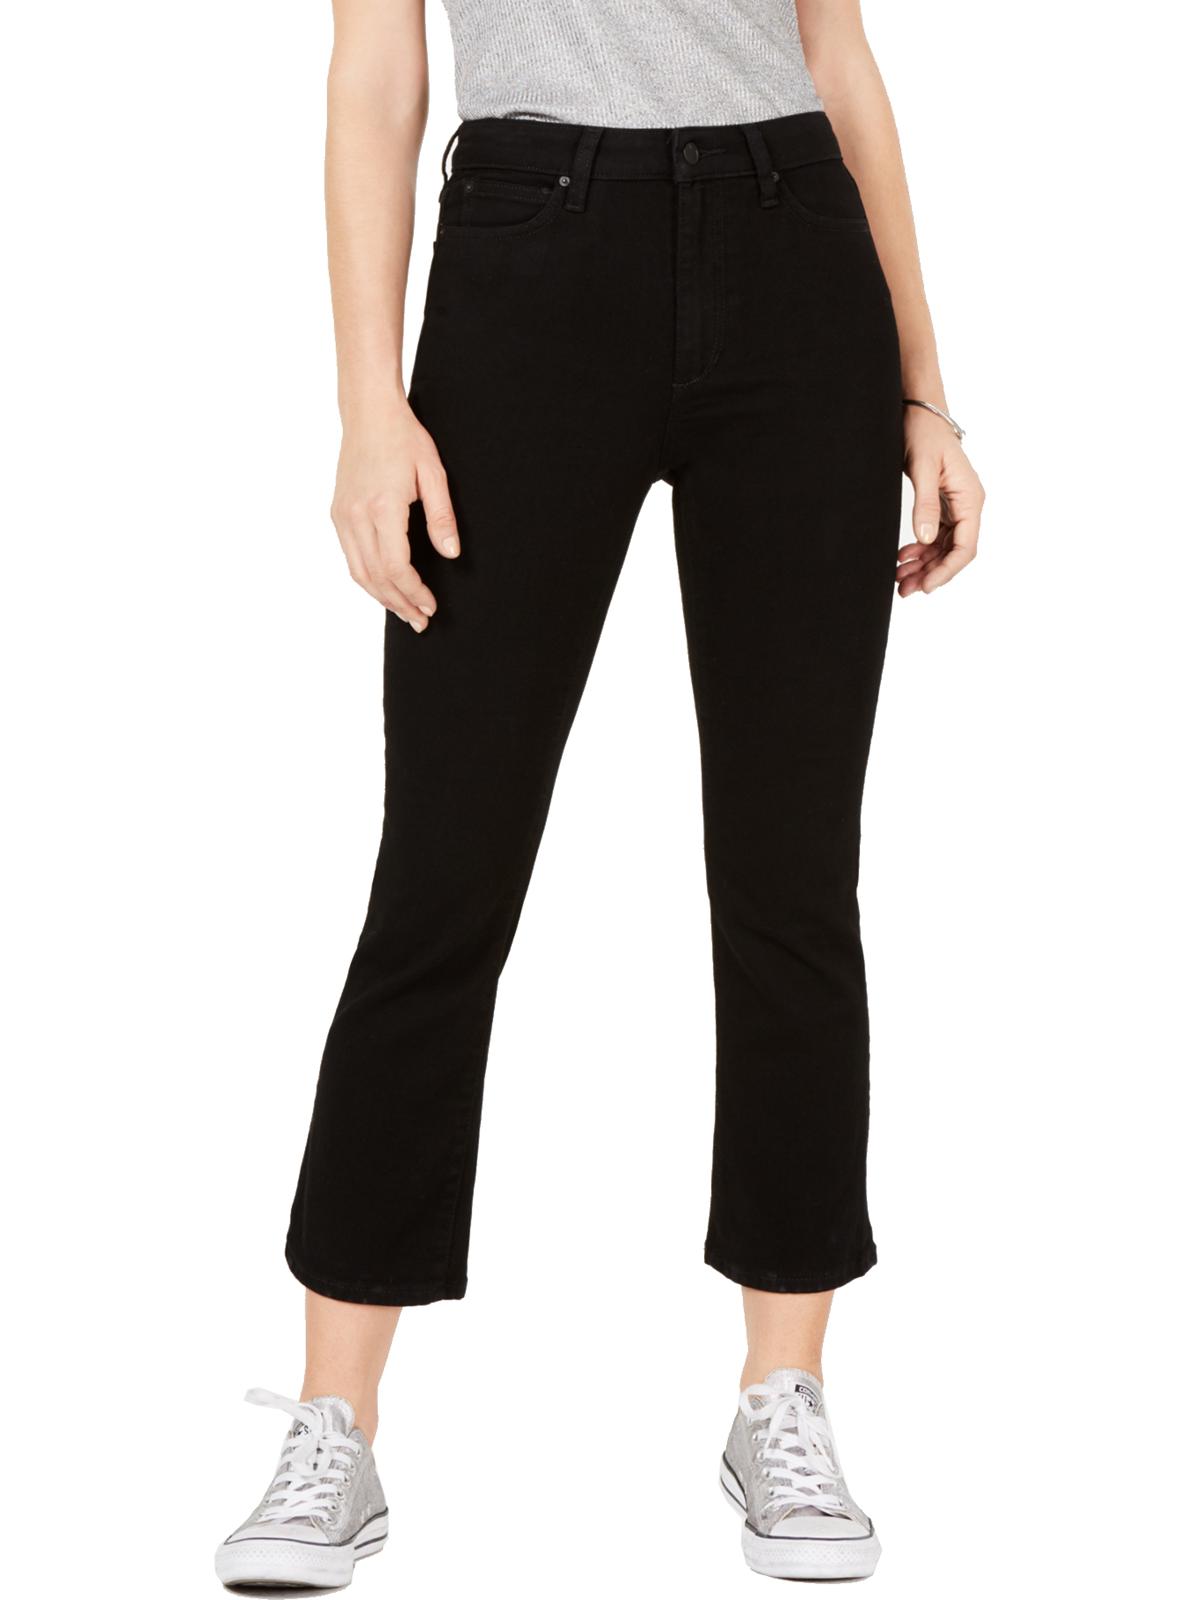 Joe's Jeans Womens The Callie Denim High Rise Cropped Jeans - image 1 of 2